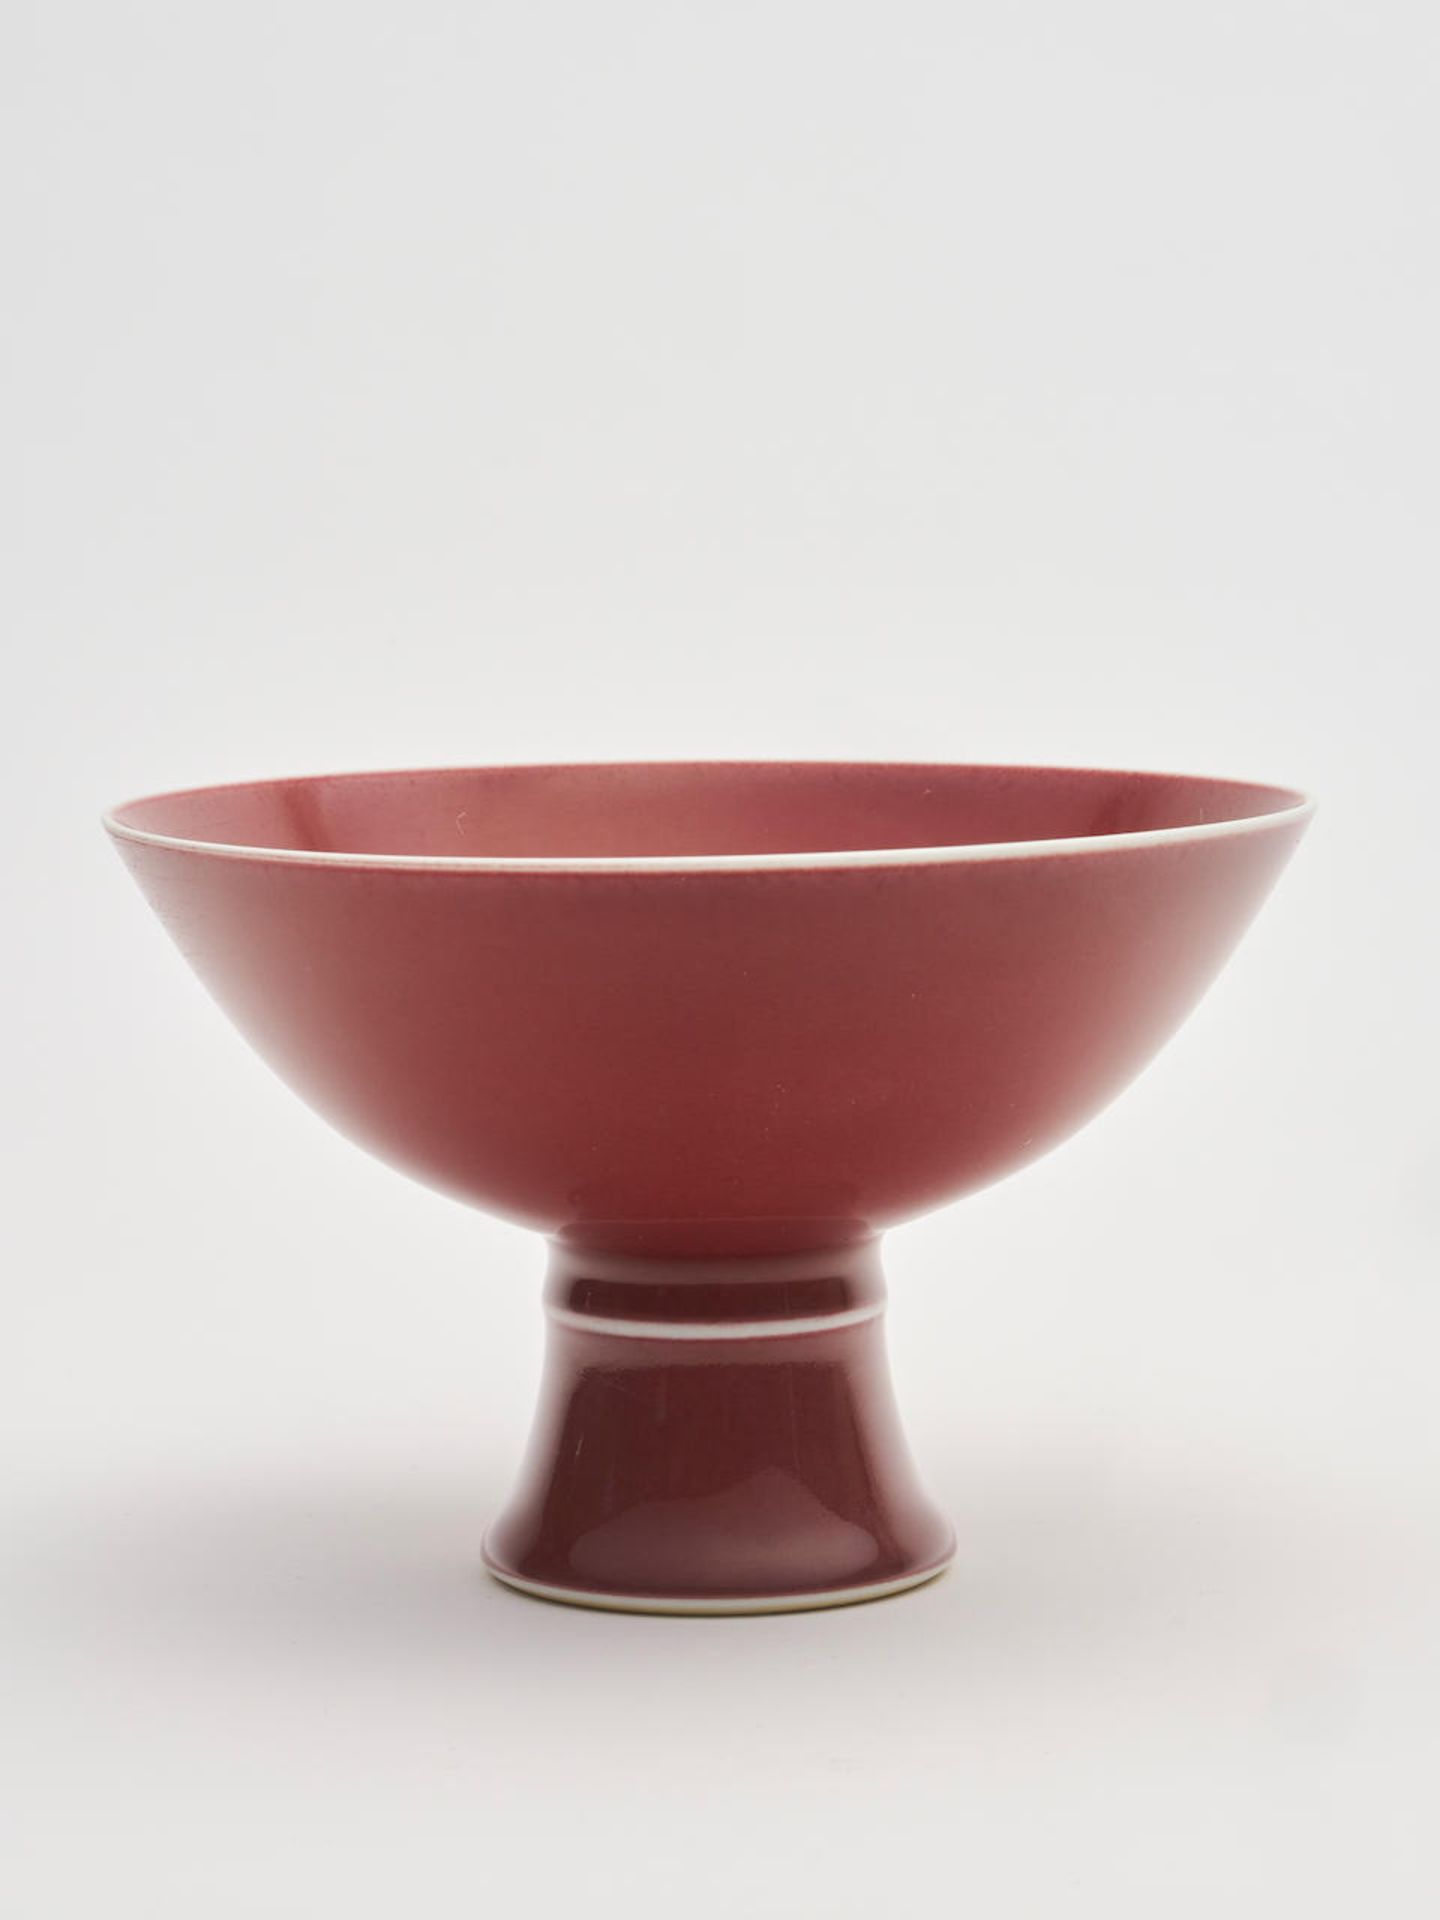 A red-glazed stem cup Qianlong six-character mark, 20th century